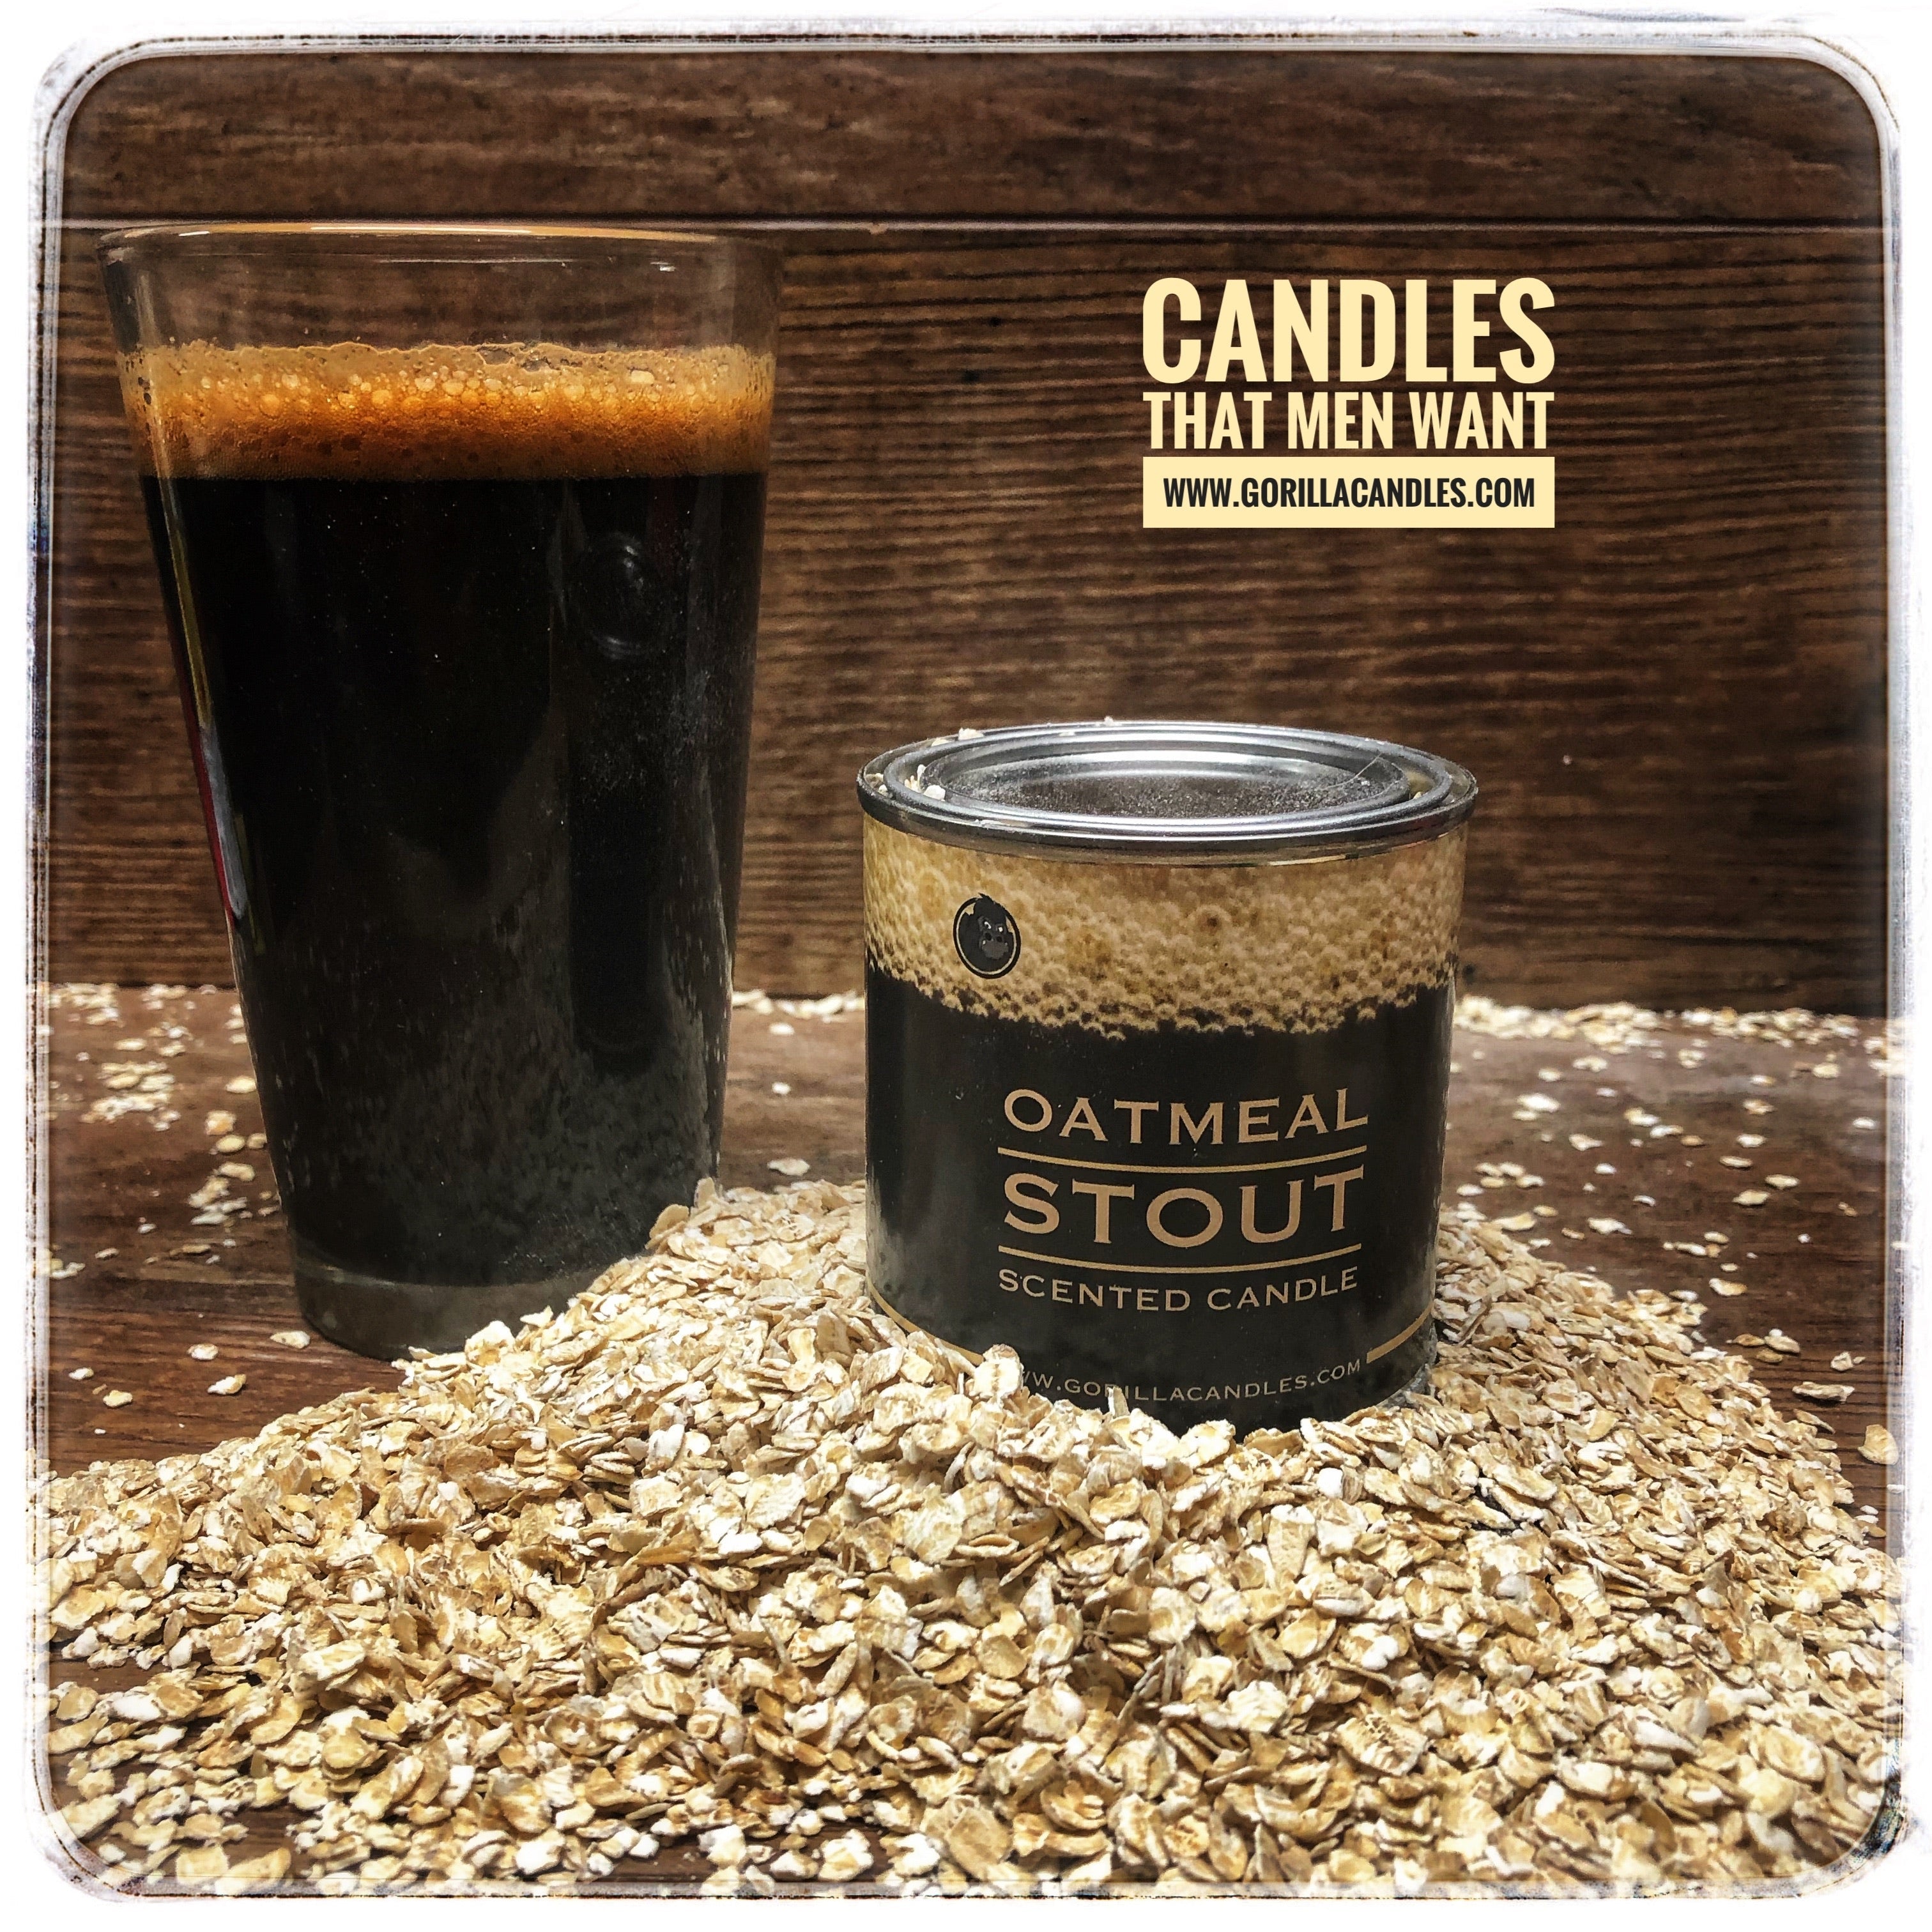 Oatmeal Stout Scented Candle by Gorilla Candles™